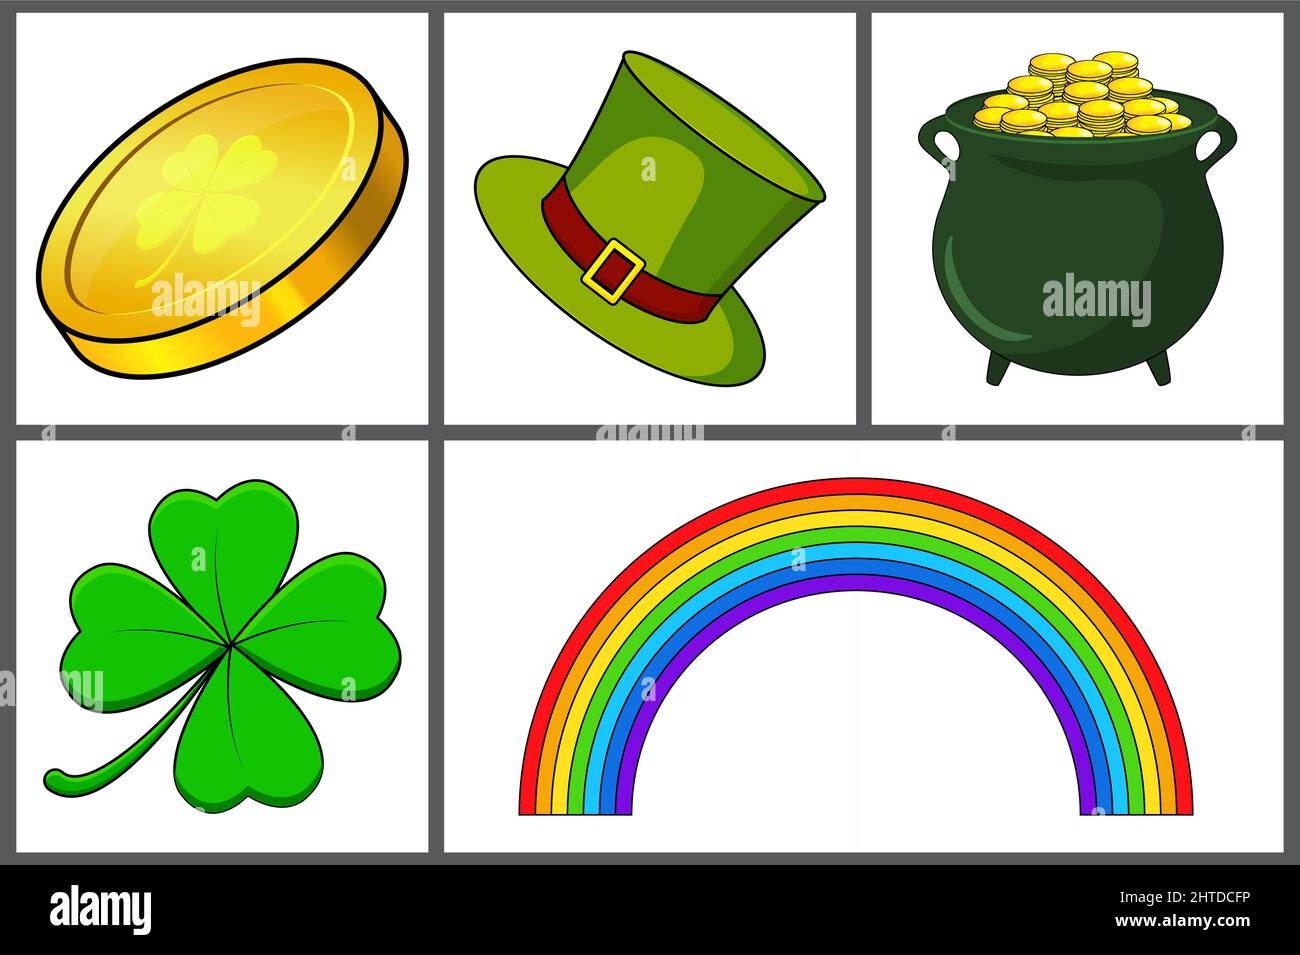 saint patricks day icons vector set illustration isolated on white background Stock Vector